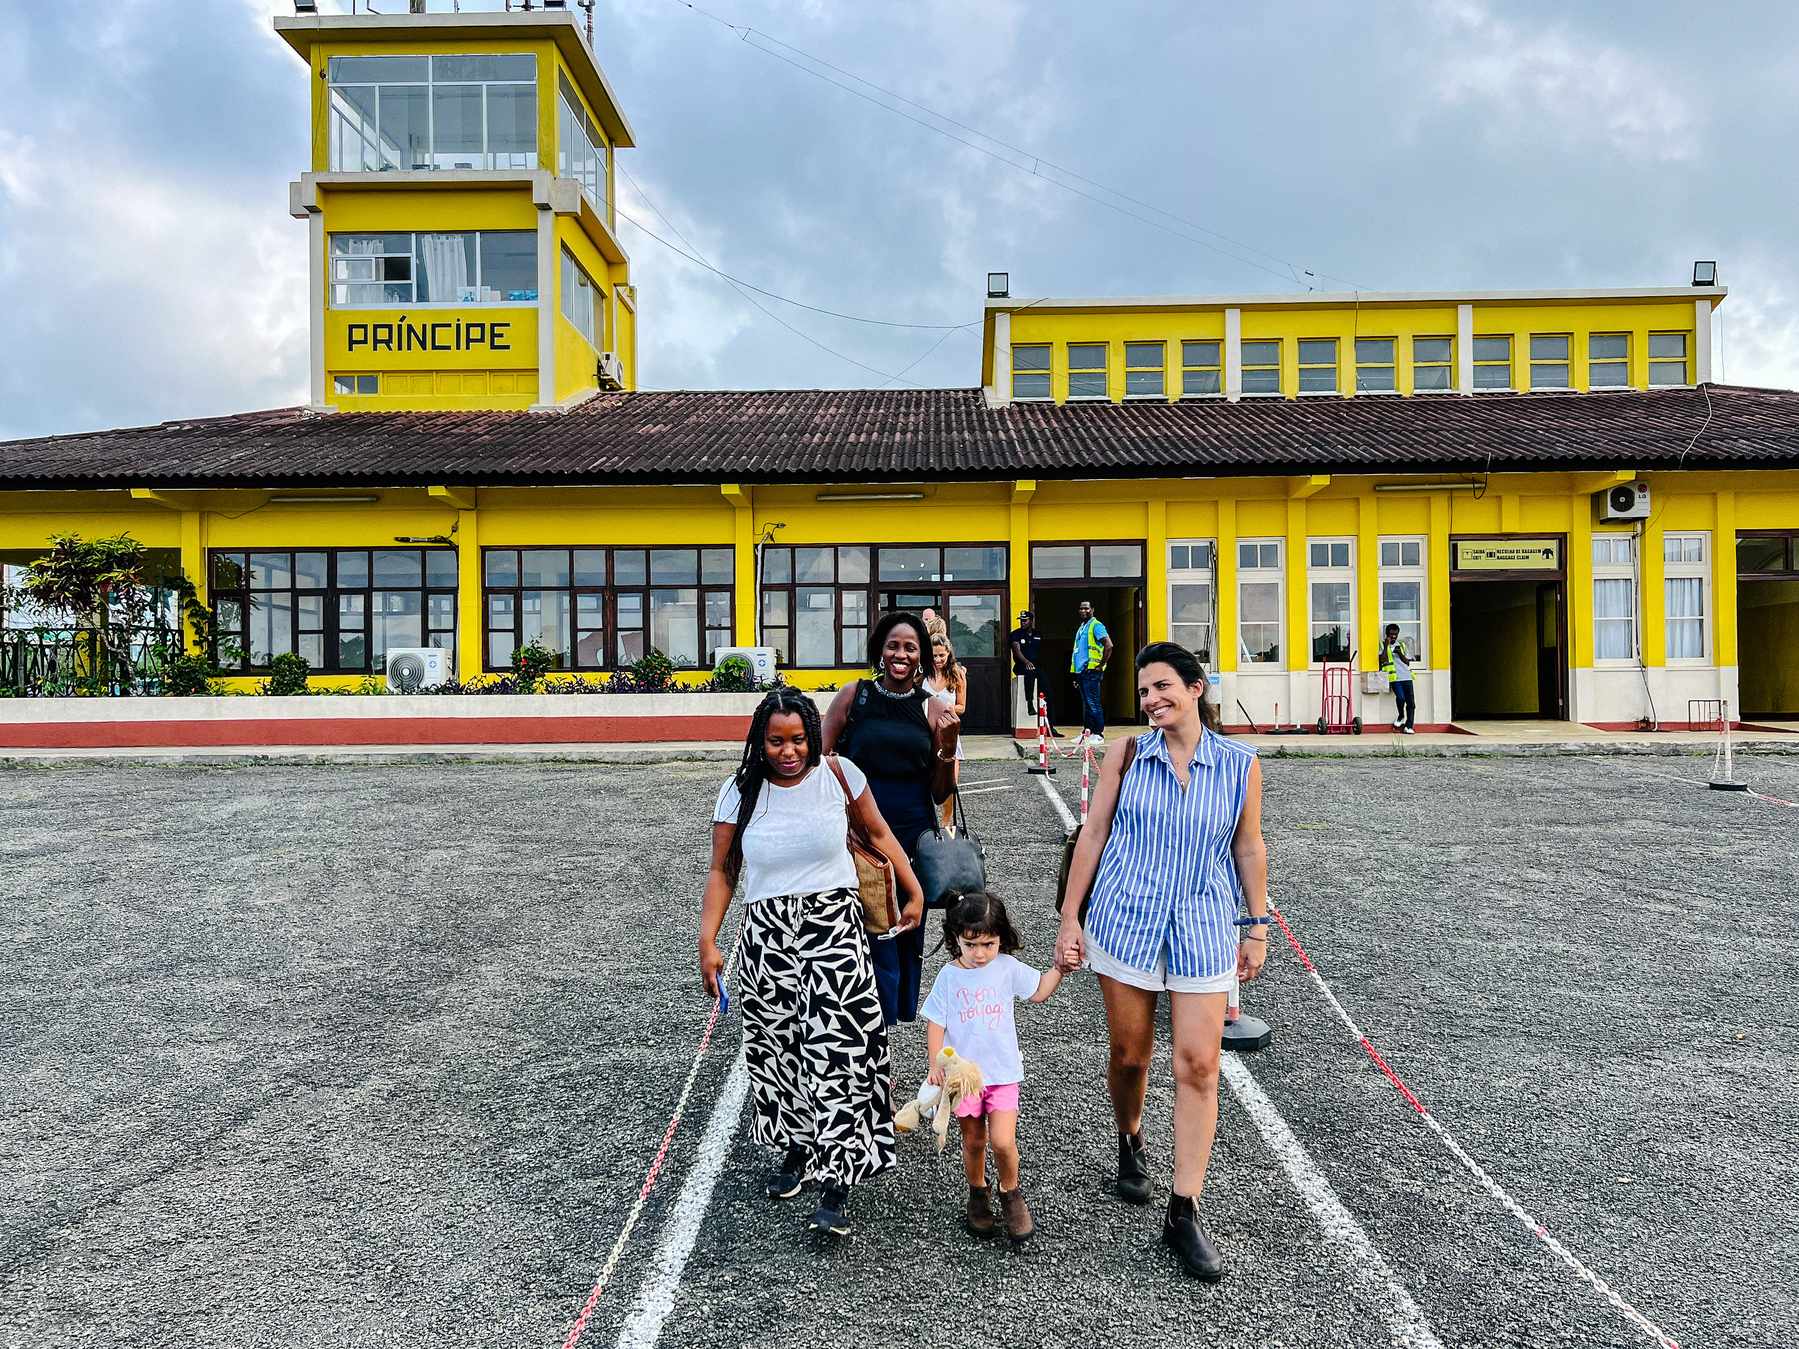 A yellow building, with the word “Príncipe” written on it, and four girls walking towards us. One is a toddler, the others grownup